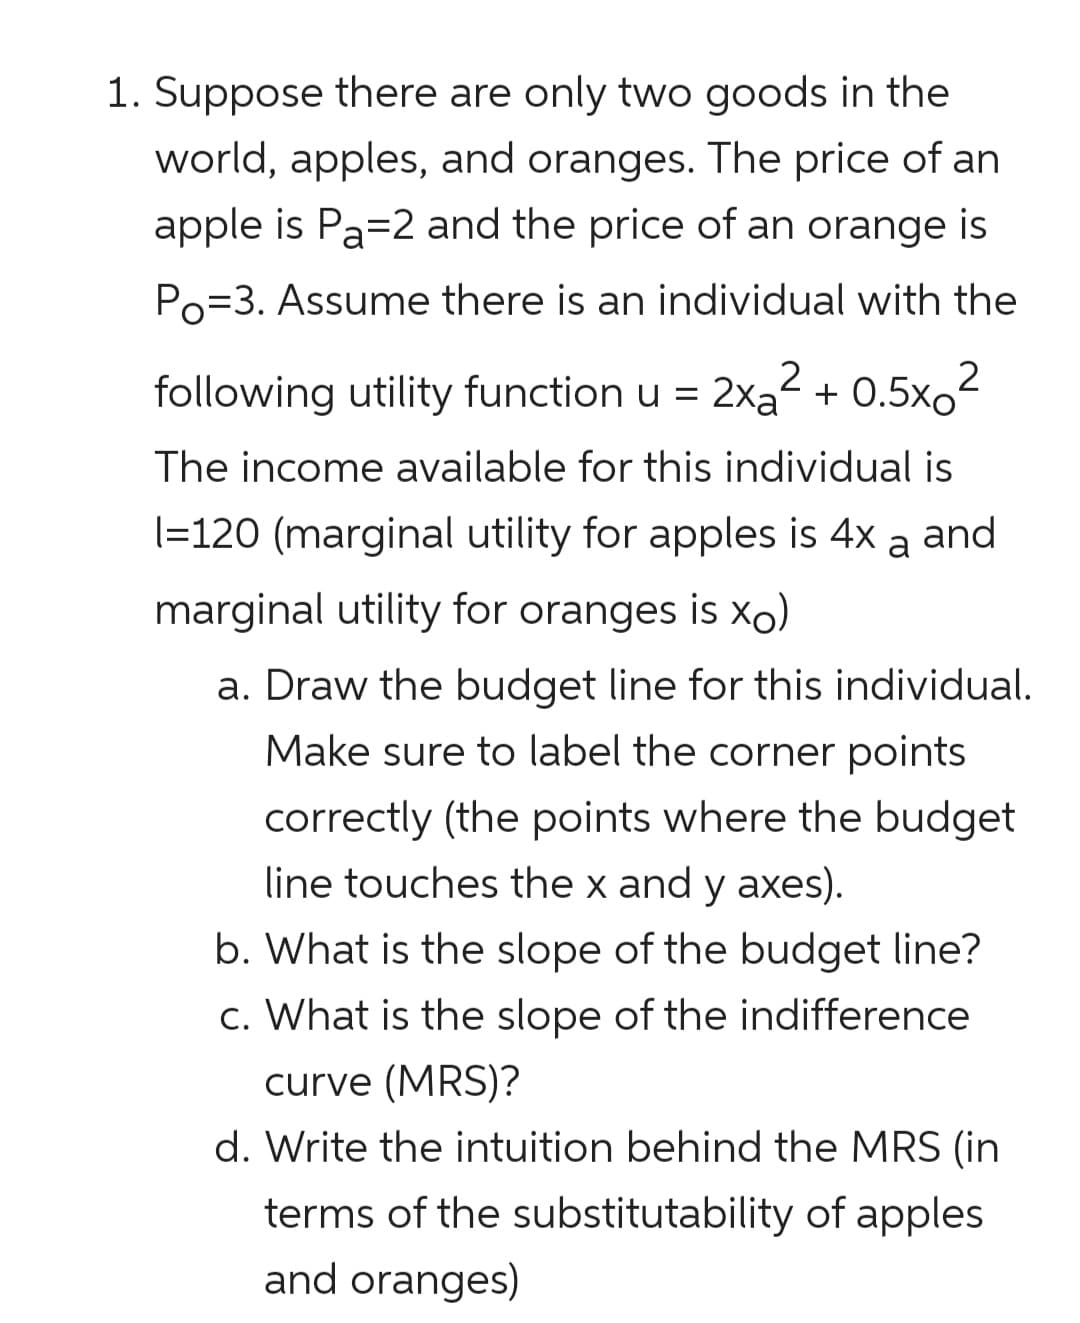 1. Suppose there are only two goods in the
world, apples, and oranges. The price of an
apple is Pa=2 and the price of an orange is
Po=3. Assume there is an individual with the
following utility function u =
2xa + 0.5xo
The income available for this individual is
(=120 (marginal utility for apples is 4x a and
marginal utility for oranges is xo)
a. Draw the budget line for this individual.
Make sure to label the corner points
correctly (the points where the budget
line touches the x and y axes).
b. What is the slope of the budget line?
c. What is the slope of the indifference
curve (MRS)?
d. Write the intuition behind the MRS (in
terms of the substitutability of apples
and oranges)
